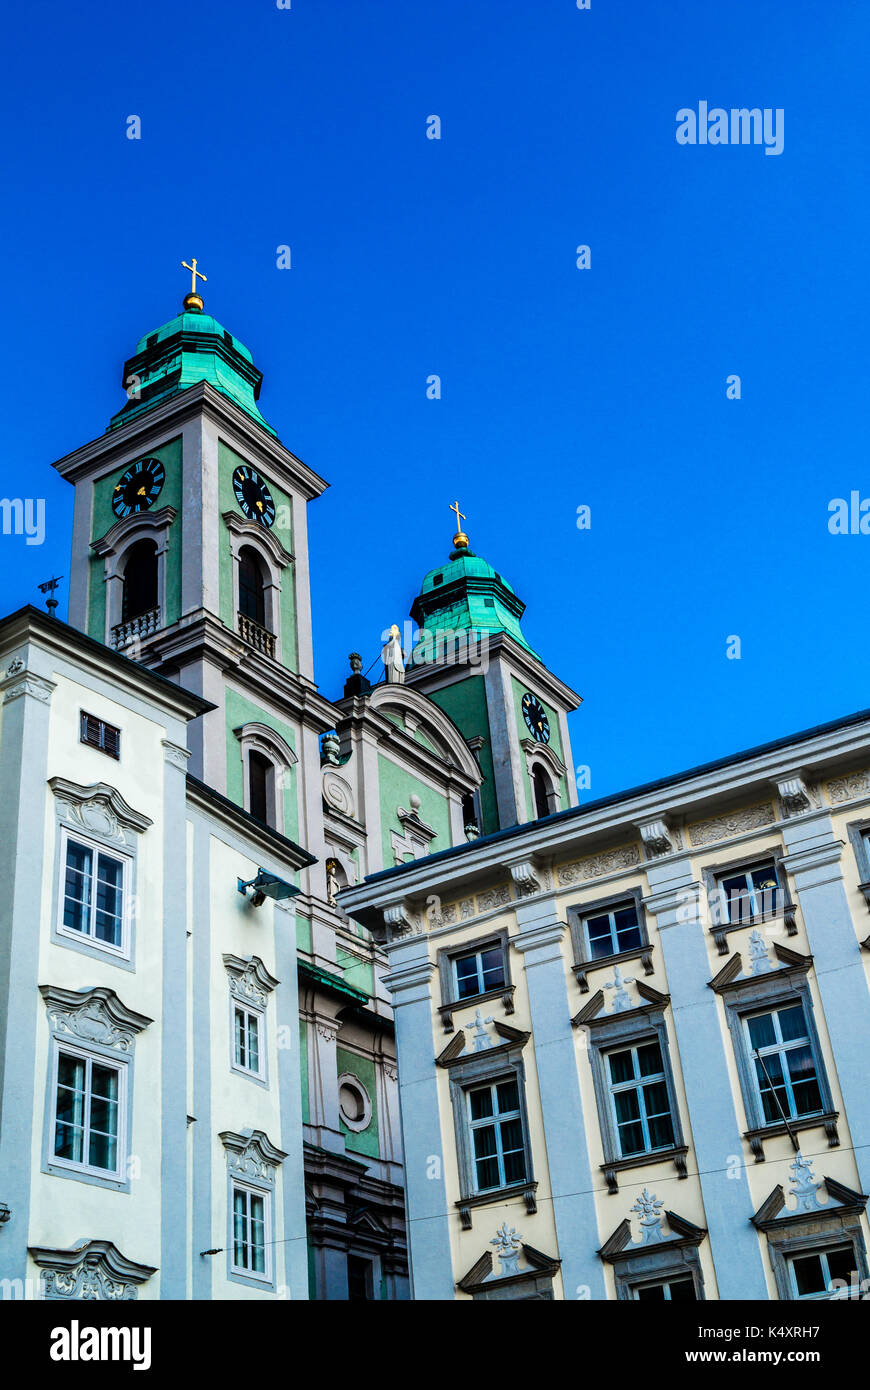 Old church in linz austria, with an aqua, blue exterior facade. a place of interest and a monumental piece of art and architectural construction Stock Photo